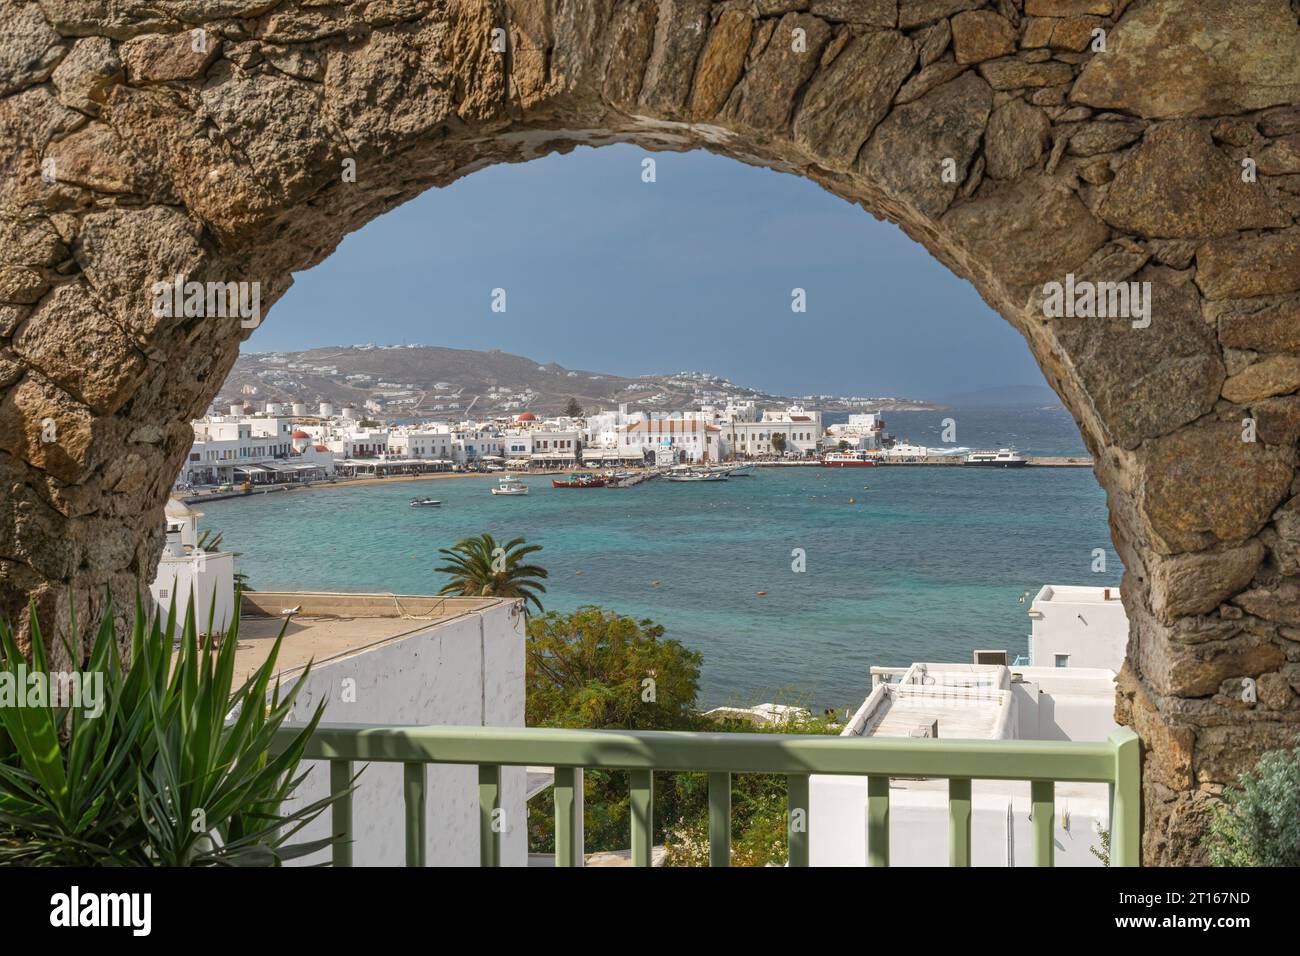 Looking across Mykonos Town Bay from a hotel on the island of Mykonos one of the Cyclades islands in Greece Stock Photo